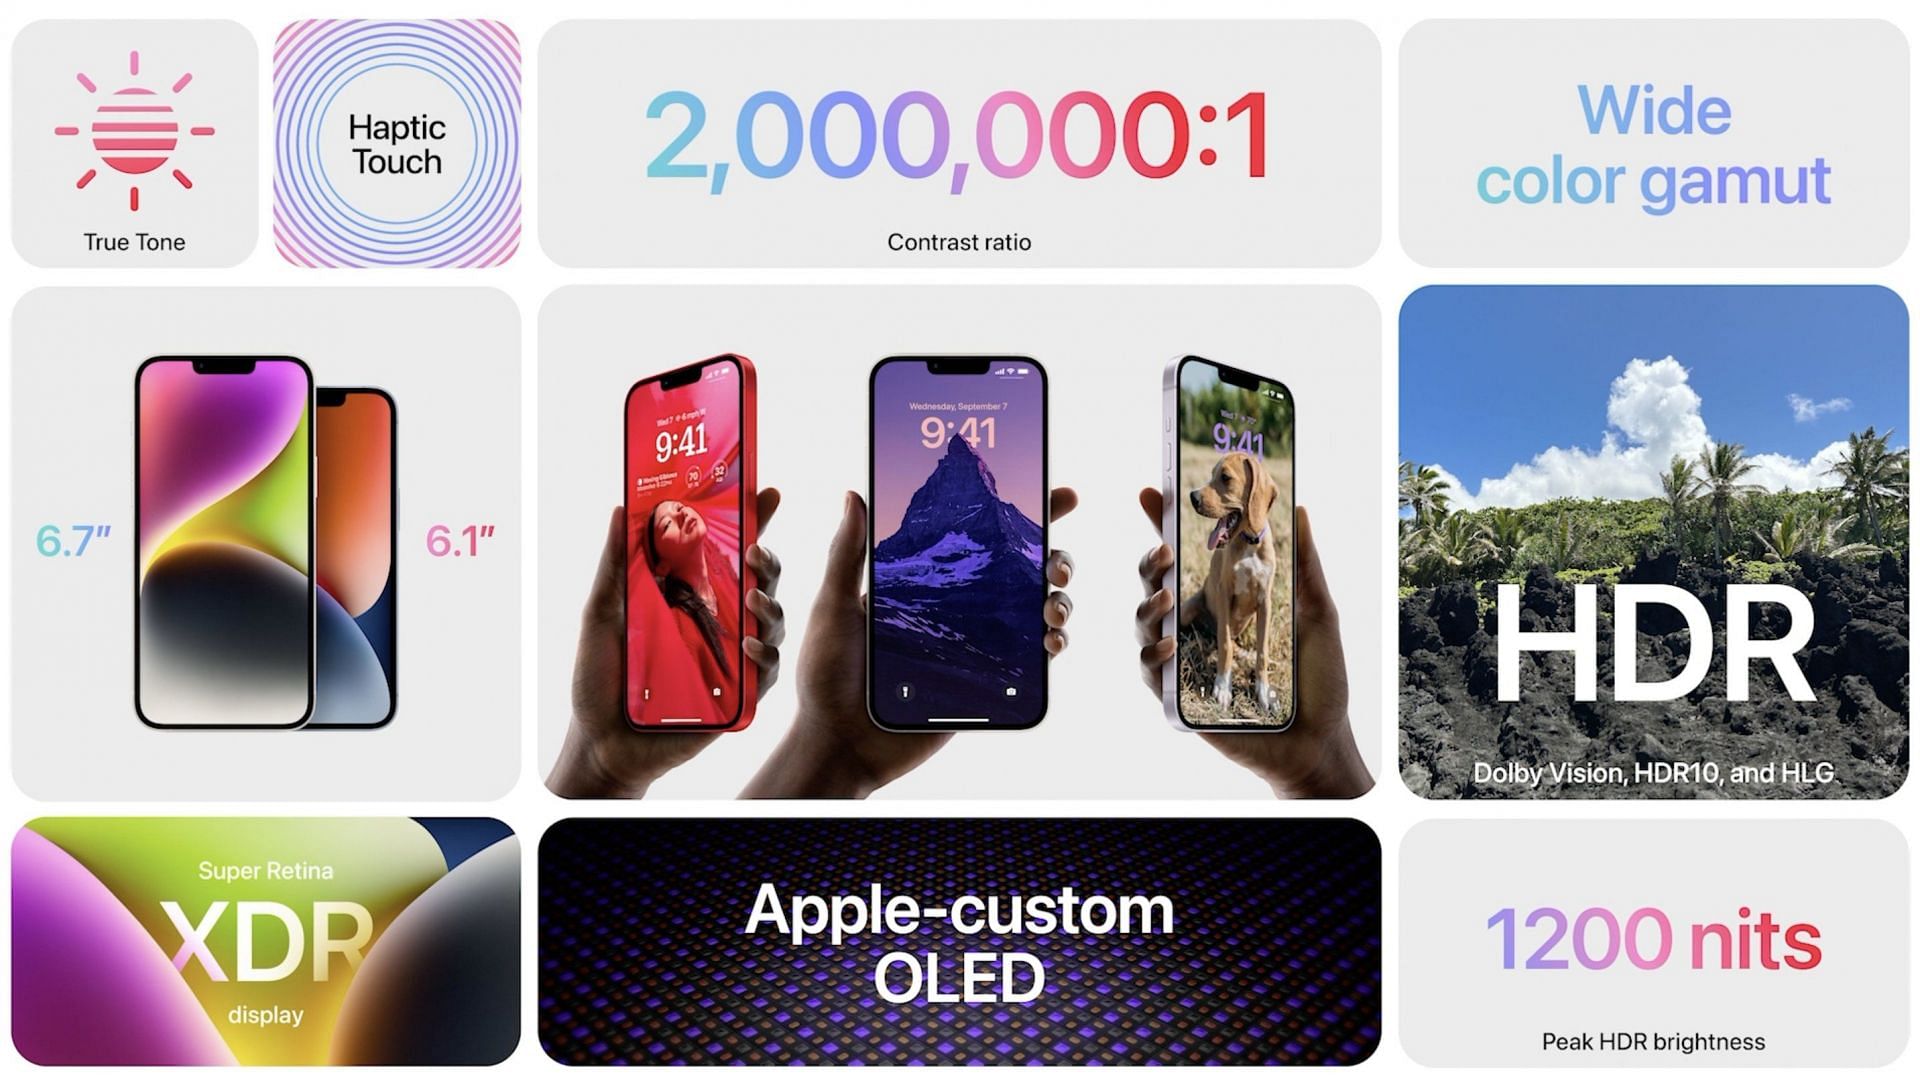 The various improvements in the latest generation iPhones (Image via Apple)